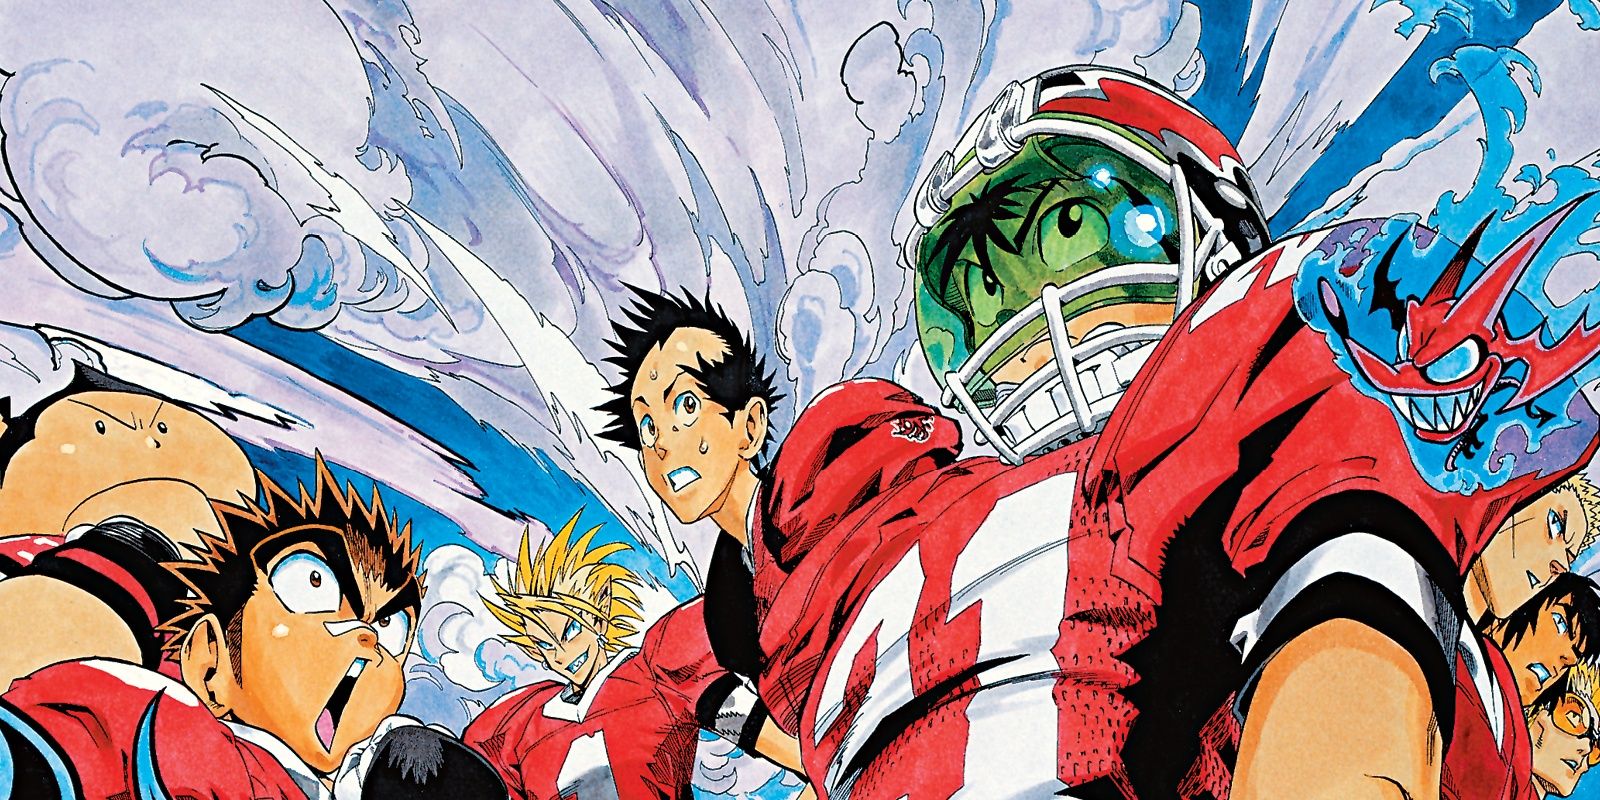 Main characters from Eyeshield 21 in uniform ready to play.